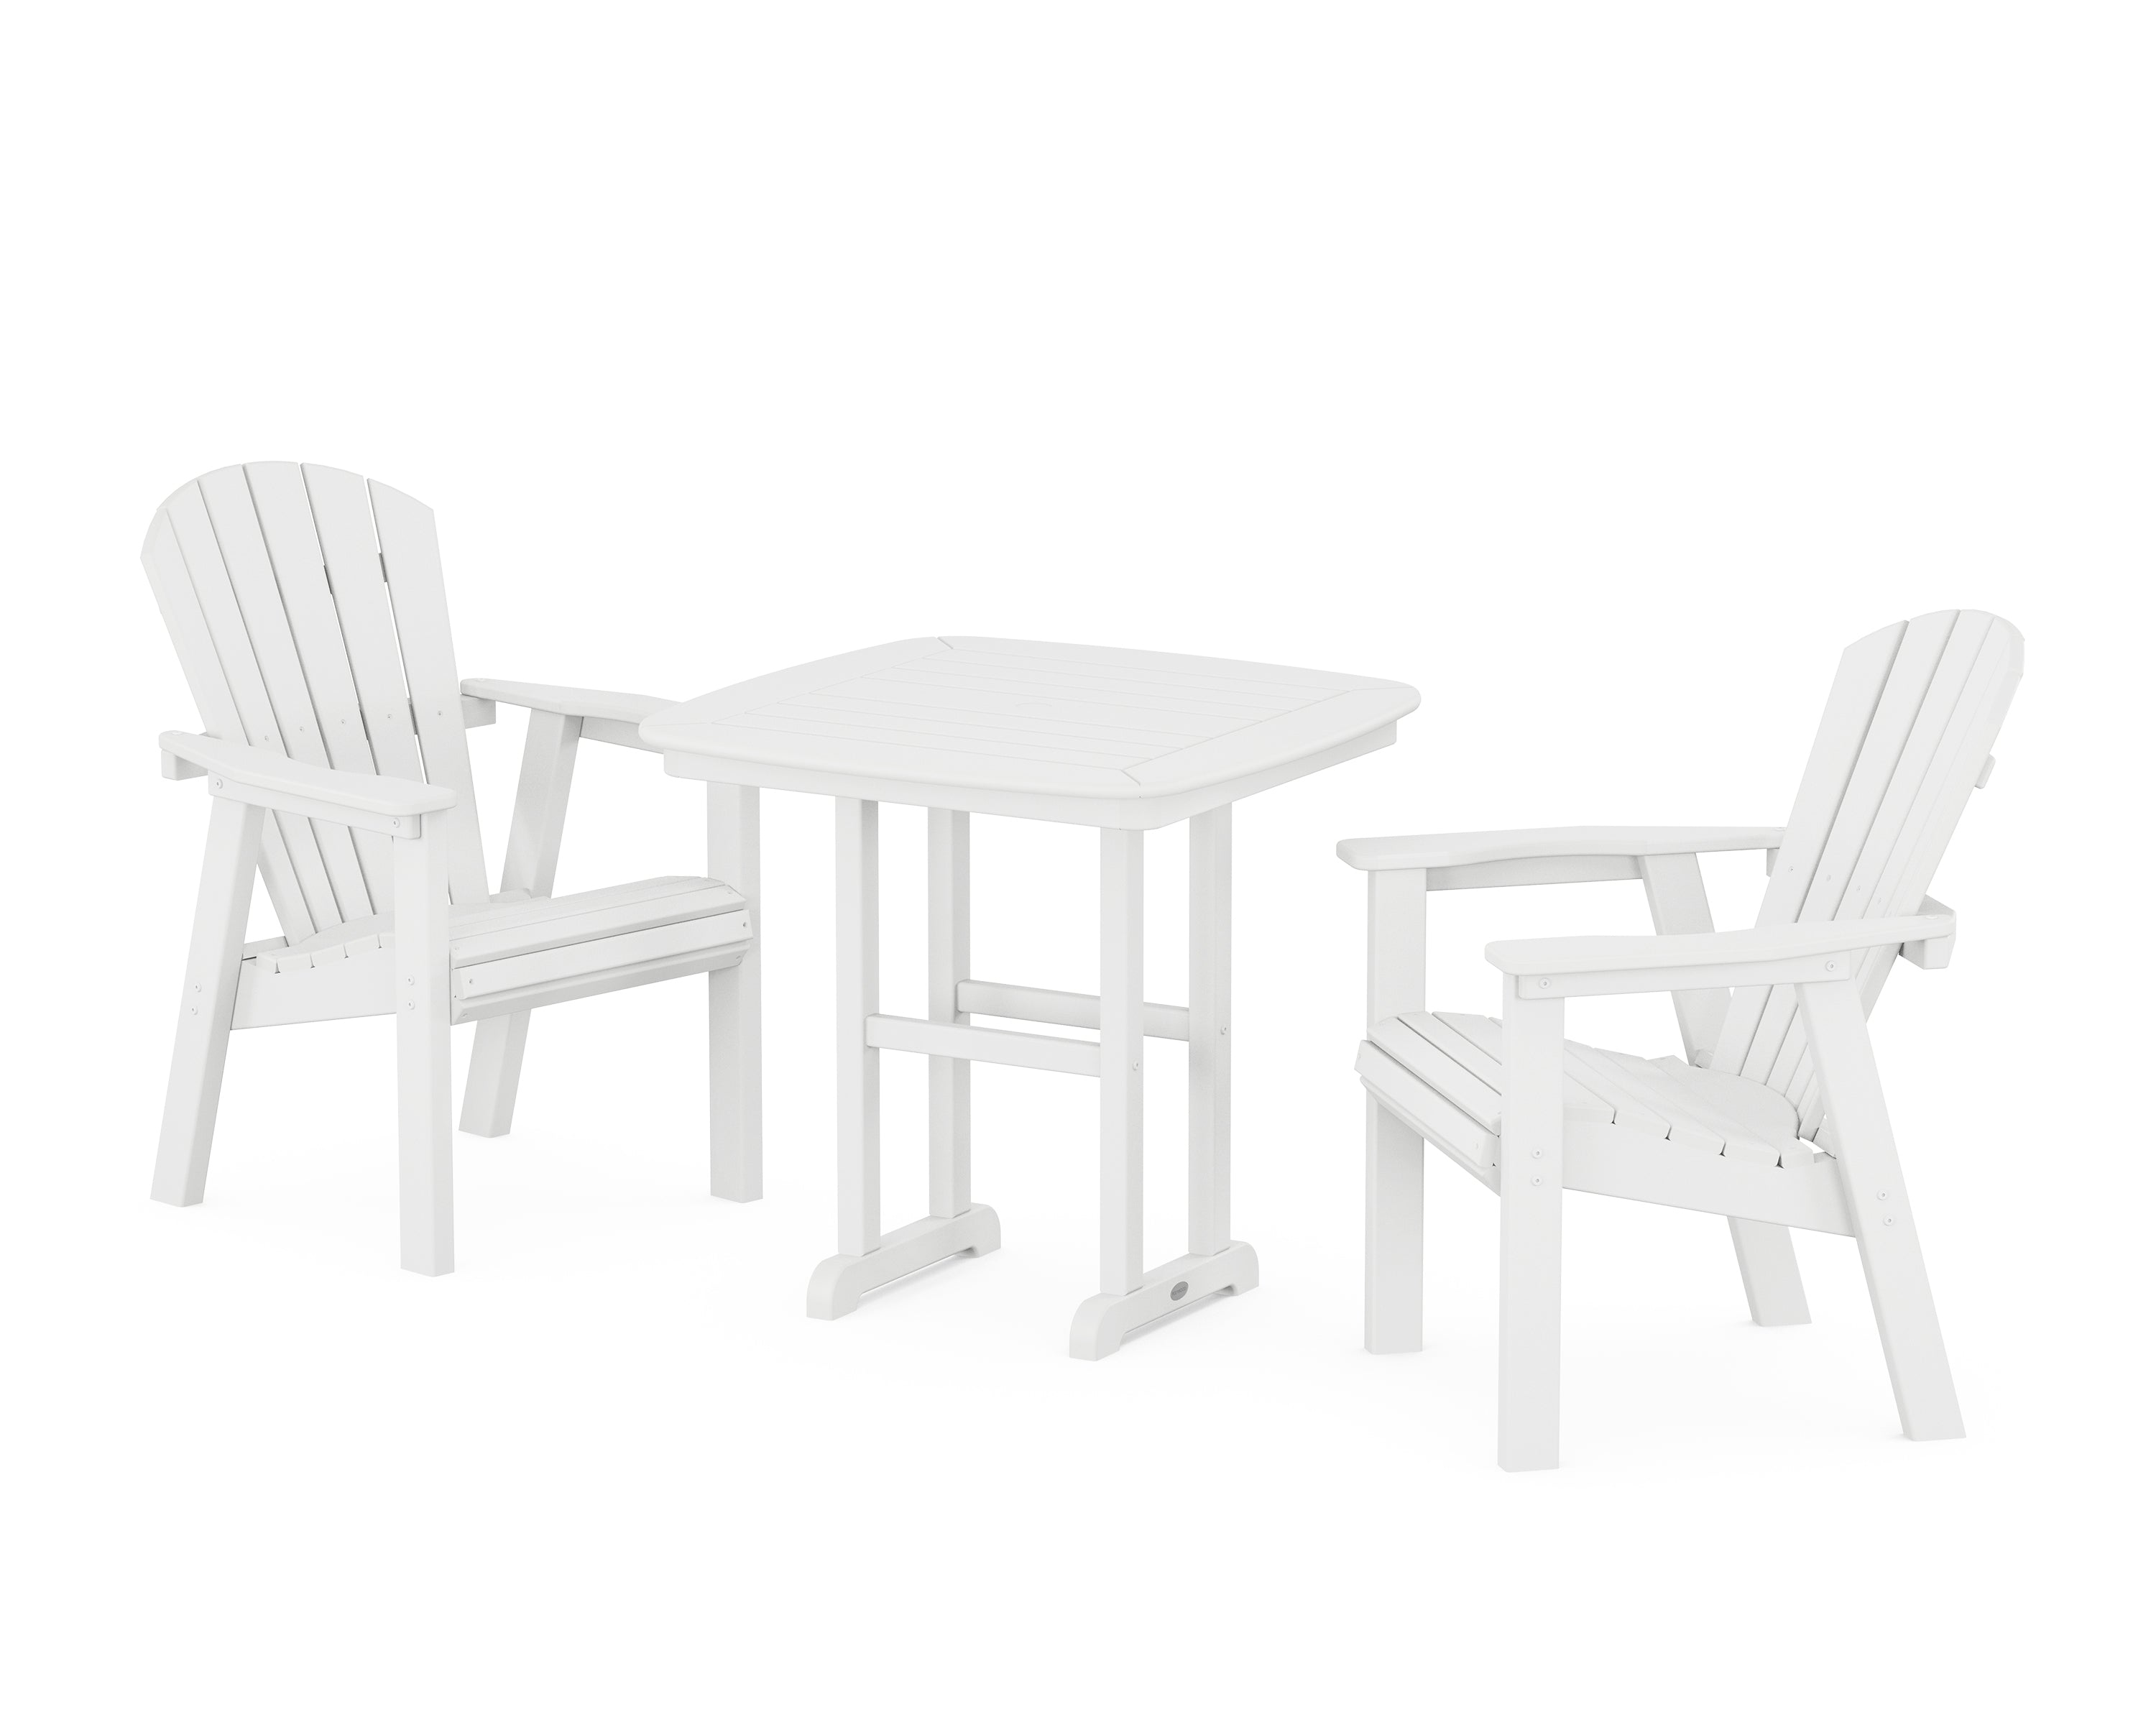 POLYWOOD® Seashell 3-Piece Dining Set in White